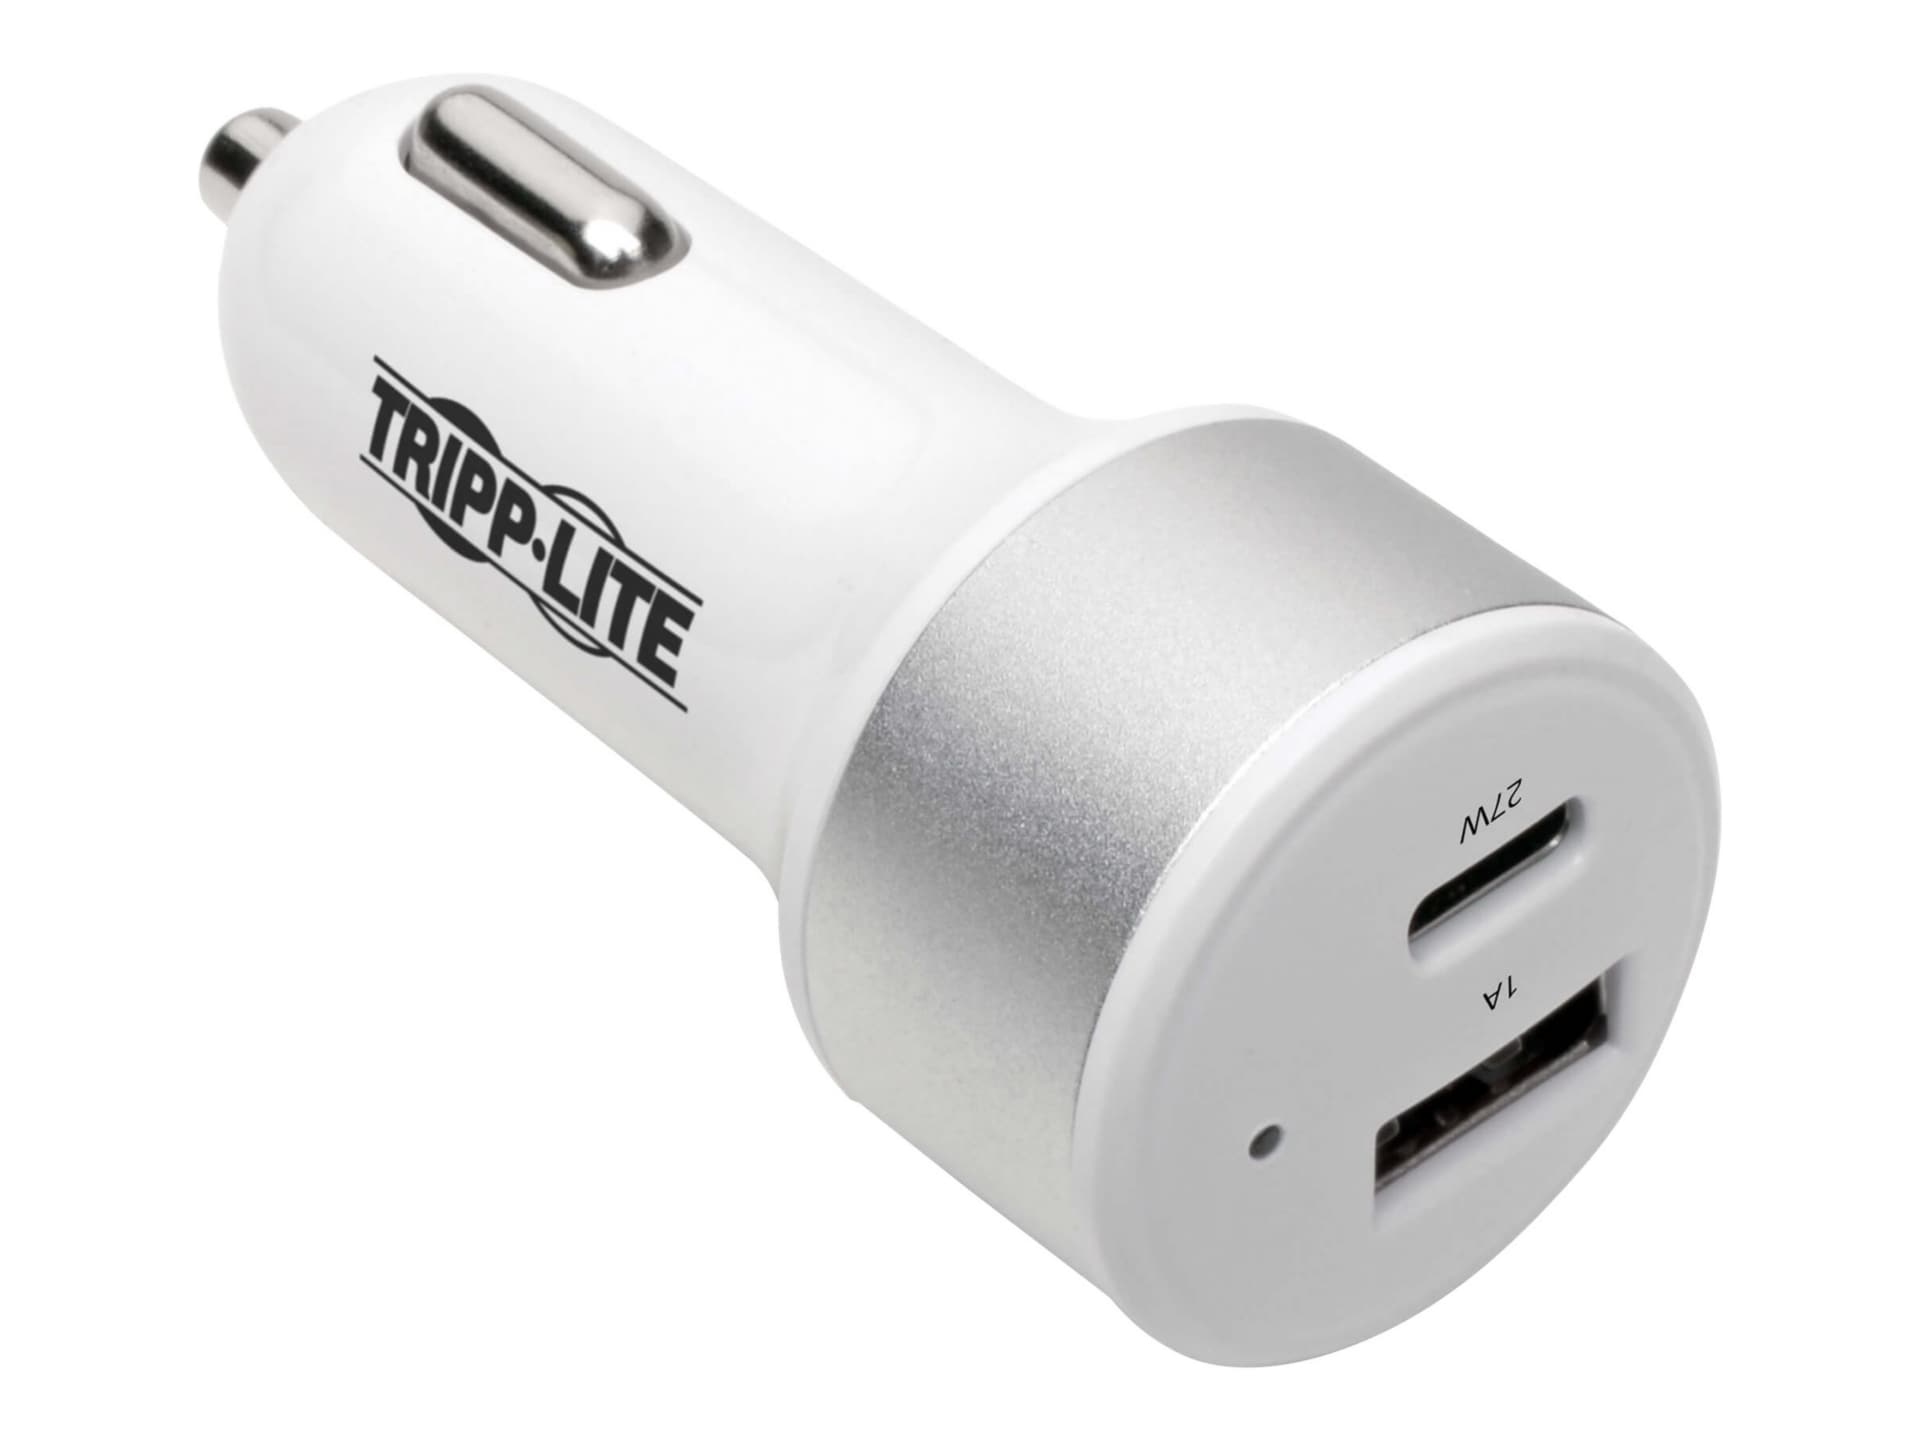 Tripp Lite Dual-Port USB Car Charger with PD Charging - USB Type C (27W) & USB  Type A (5V 1A/5W), UL 2089 car power - U280-C02-C1A1 - Laptop Chargers &  Adapters 